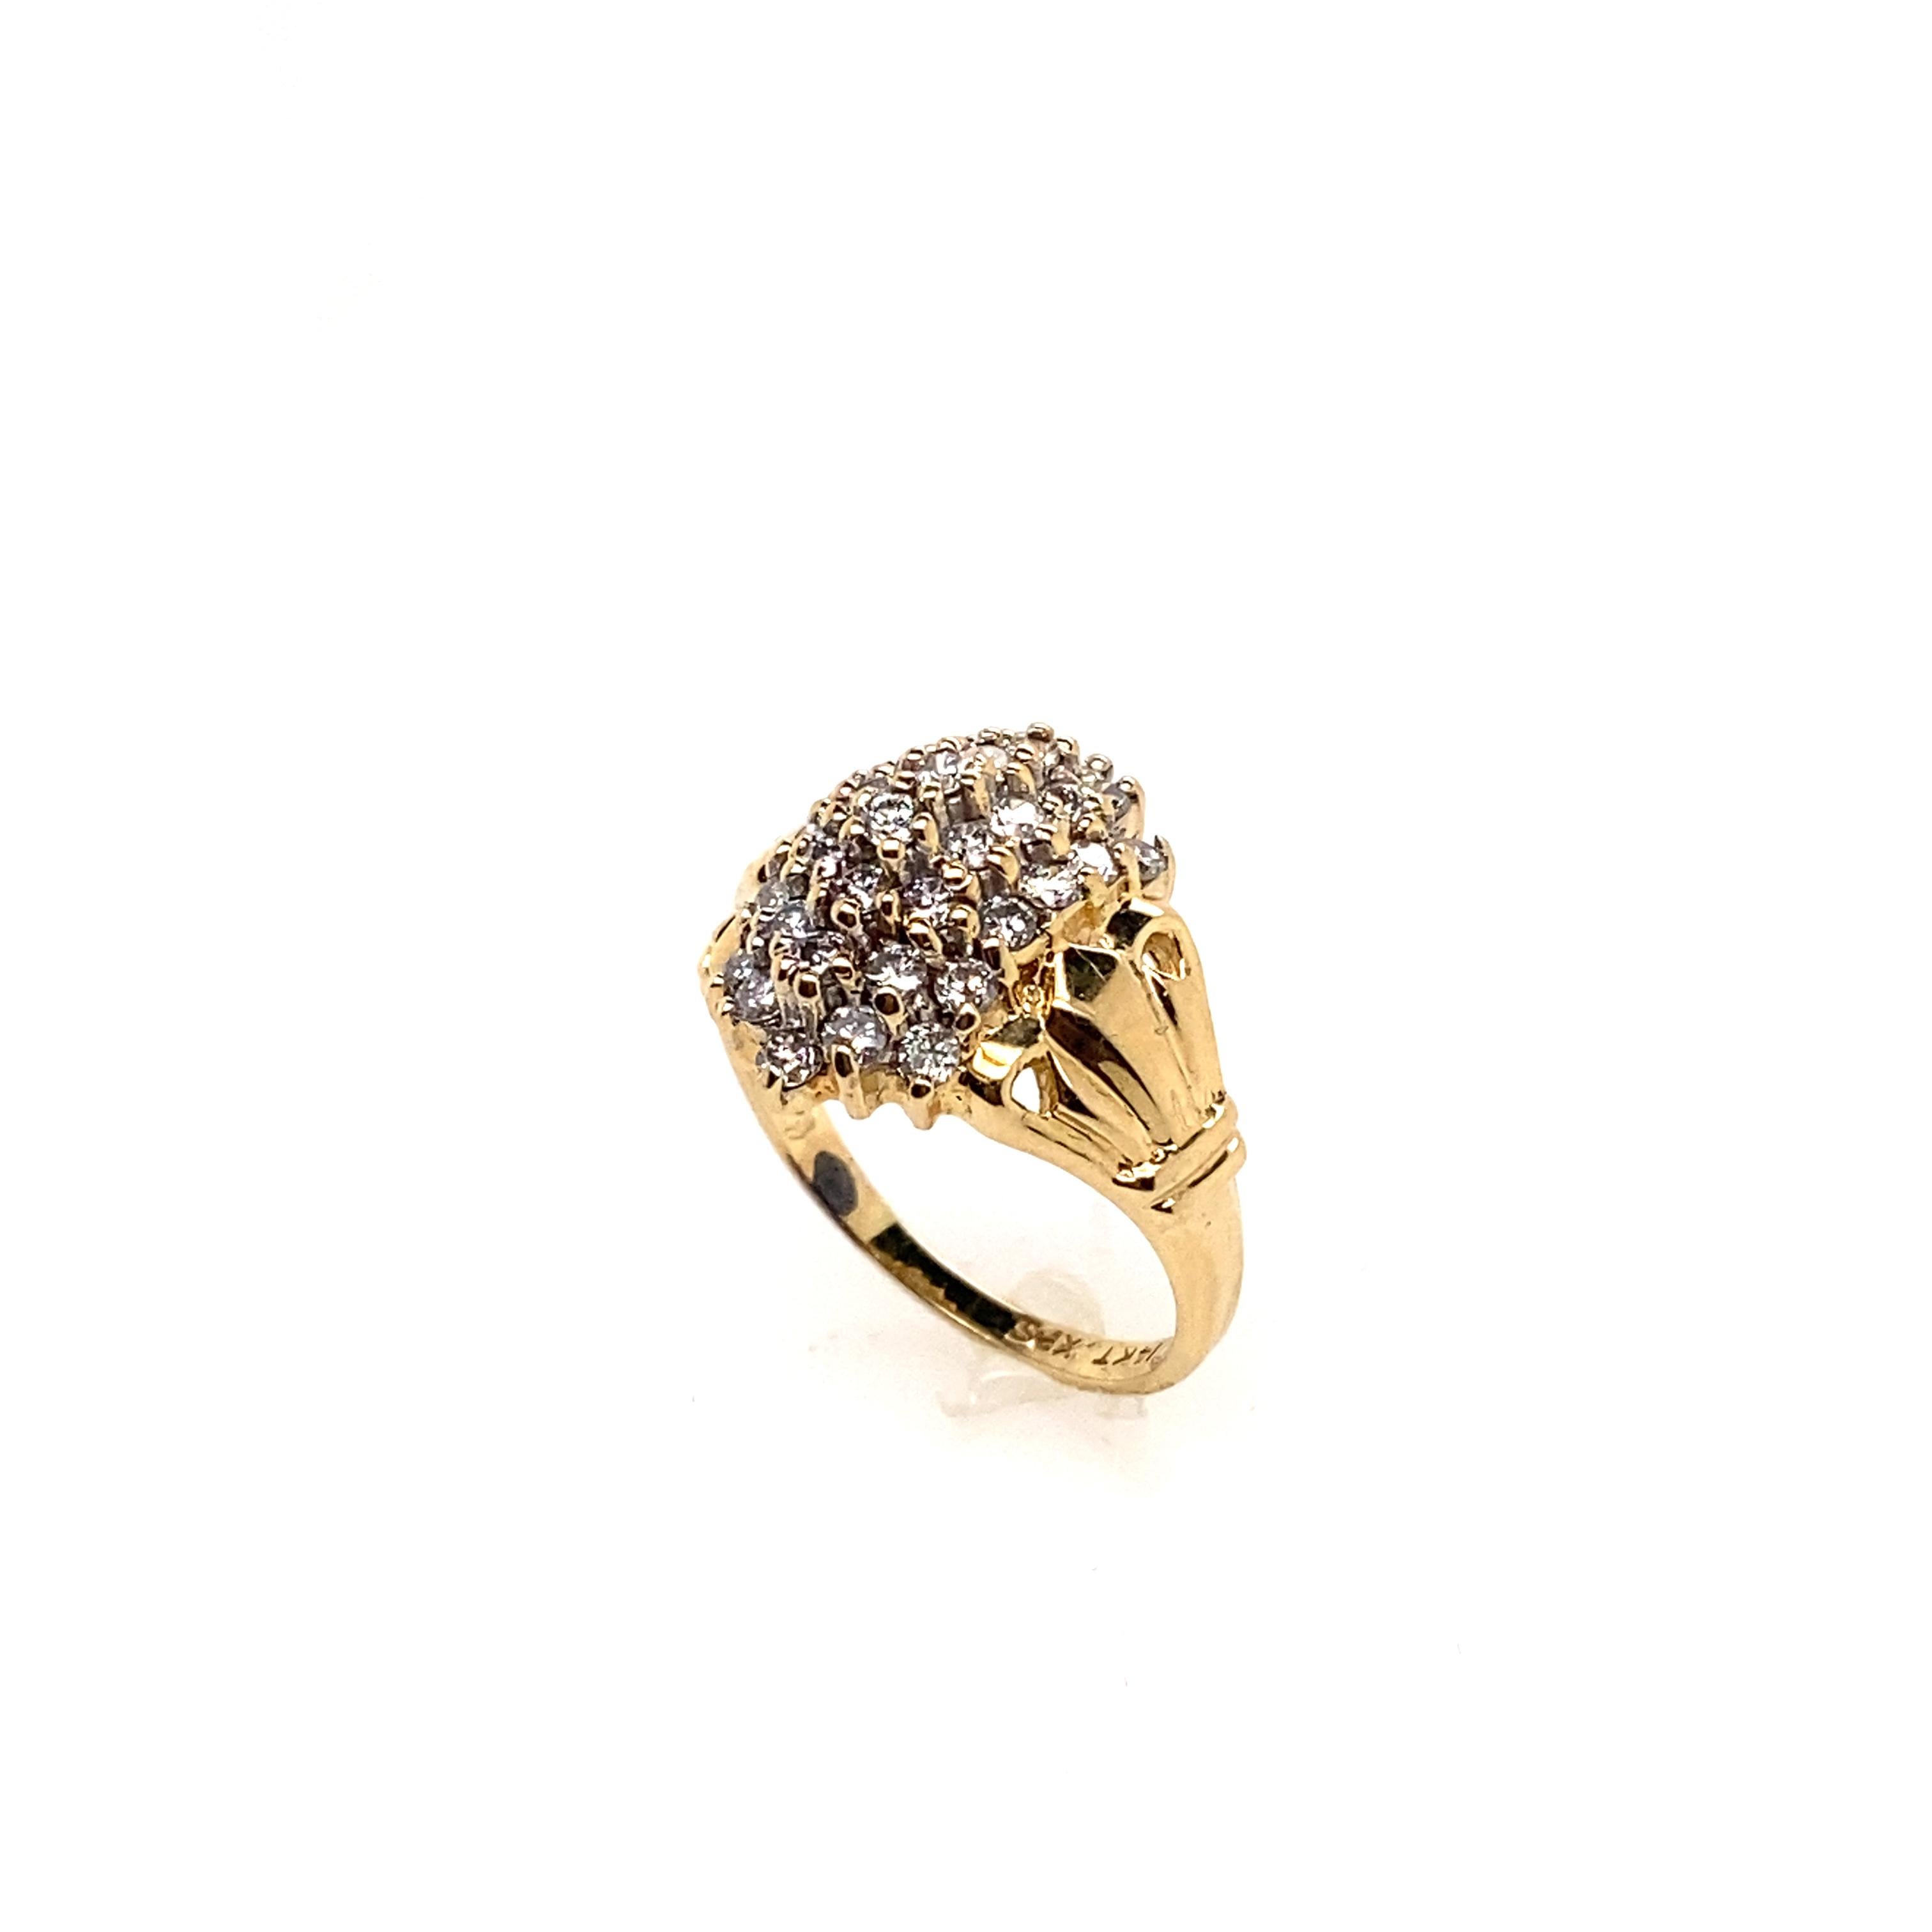 The thirty-four brilliant round diamonds set in the 14K yellow gold ring featured by a cluster design. This ring features a very fashionable look and can be worn in everyday.

Diamonds Weight: 1.00 carat
Diamonds Shape : Brilliant Round
Diamonds